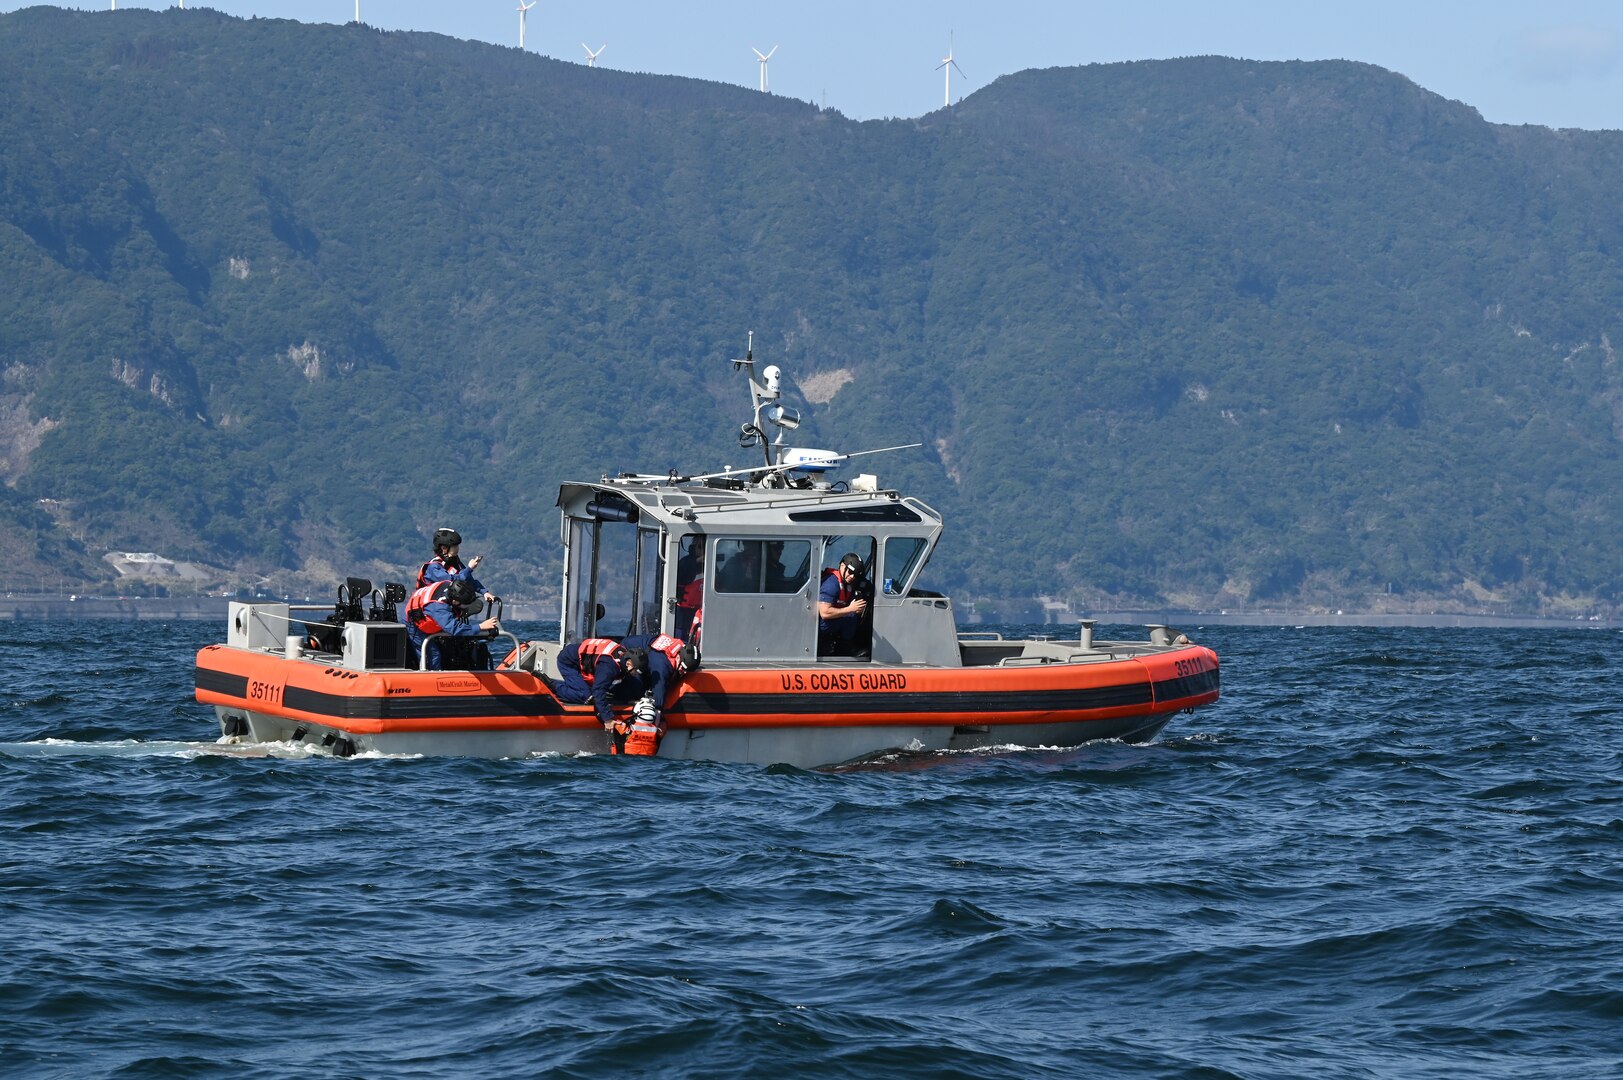 U.S. Coast Guard, Japan Coast Guard crews conduct joint search-and-rescue exercise